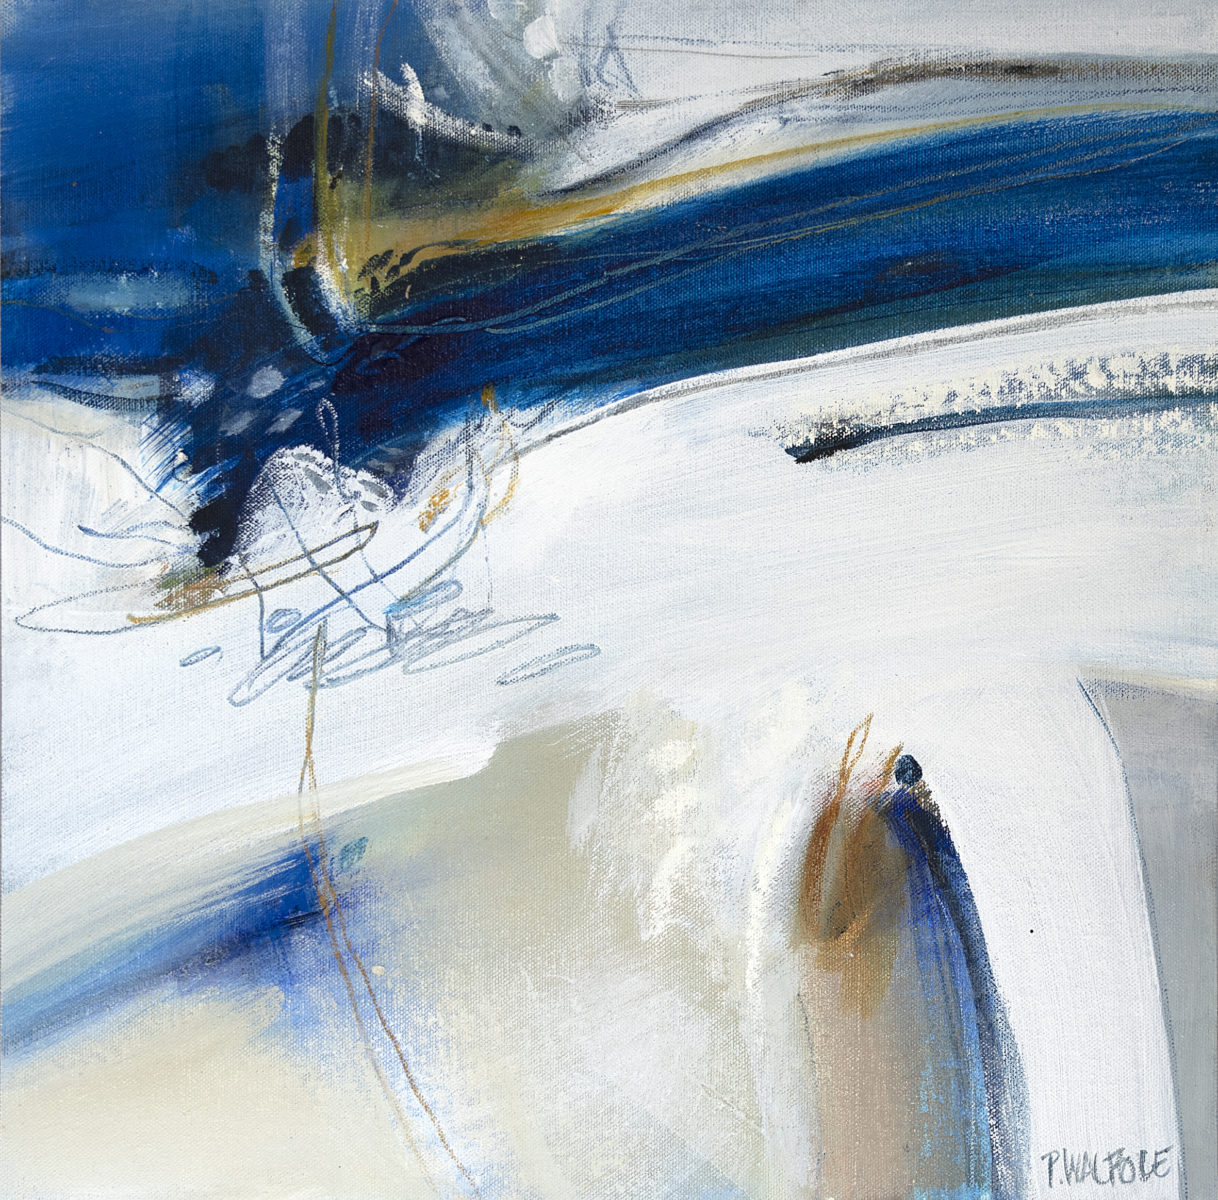 Passing Squall III | Pam Walpole | Mixed media on canvas on board | 40 x 40 cm, framed in aluminium | SOLD